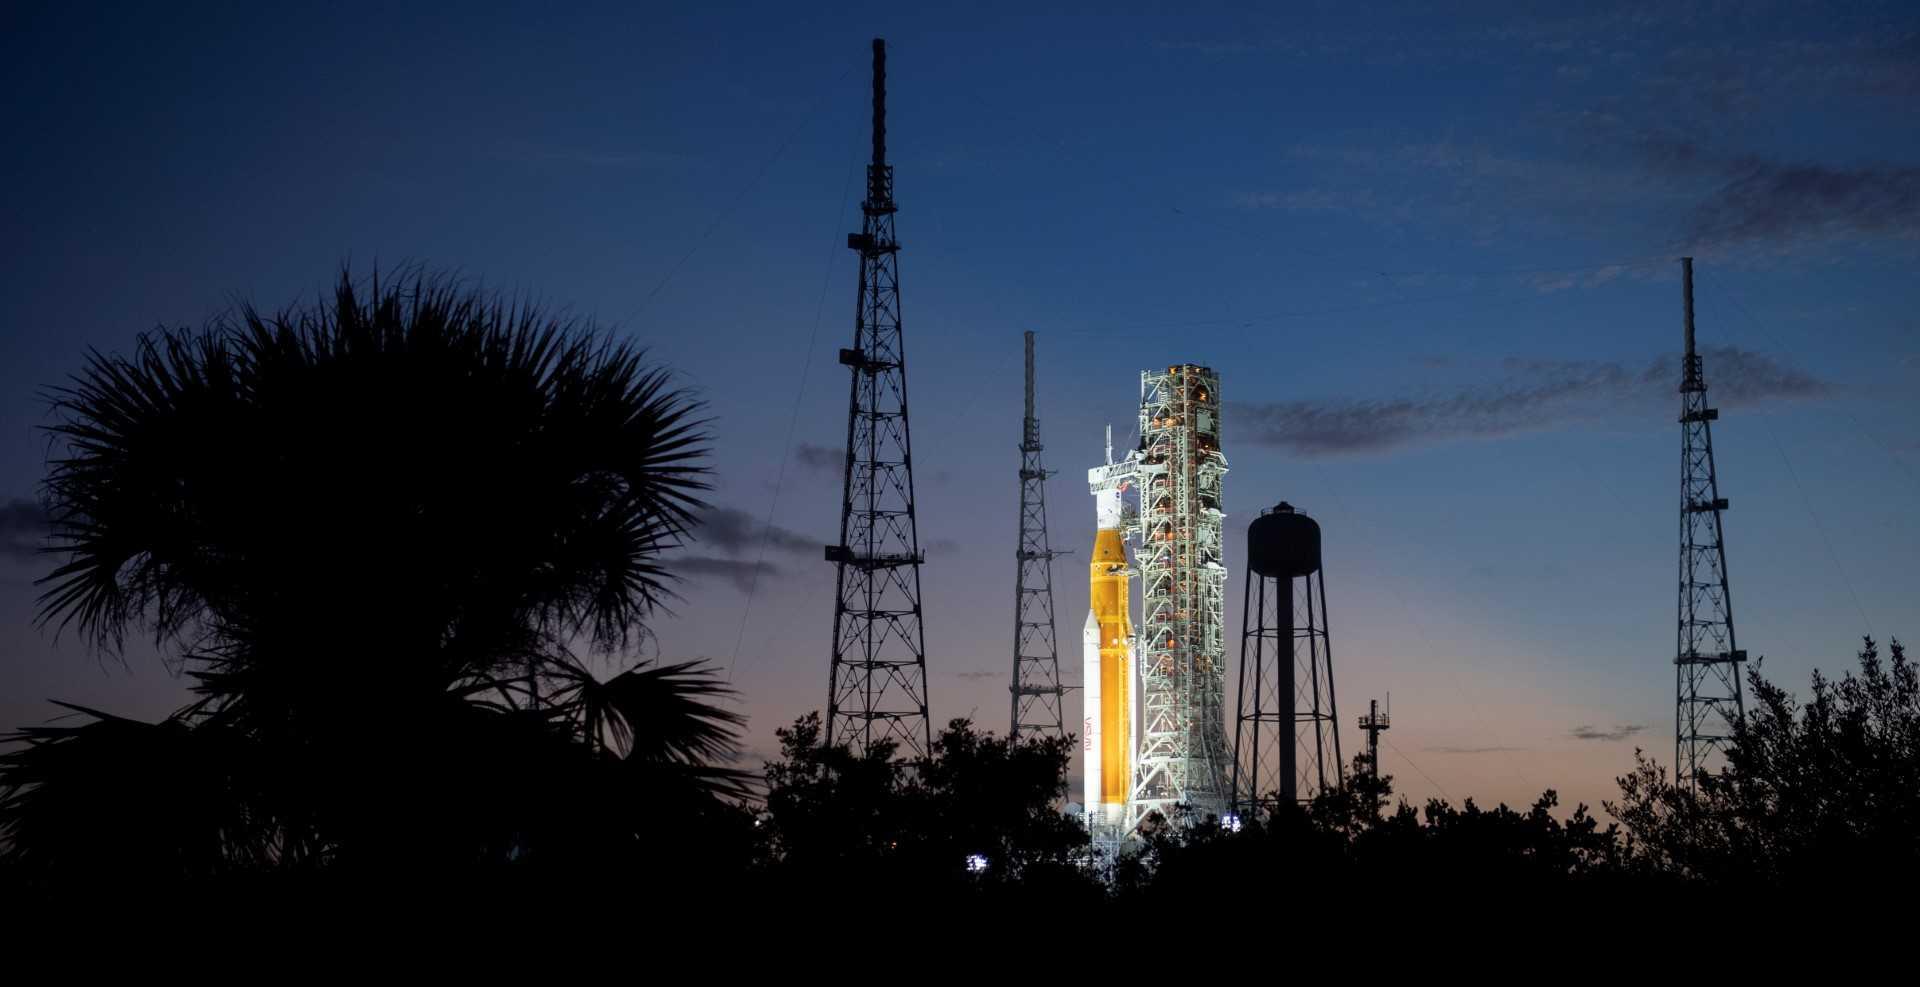 This Nasa handout photo shows Nasa's Space Launch System rocket with the Orion spacecraft aboard illuminated by spotlights after sunset atop the mobile launcher at Launch Pad 39B as preparations for launch continue, Nov 6. Photo: AFP 